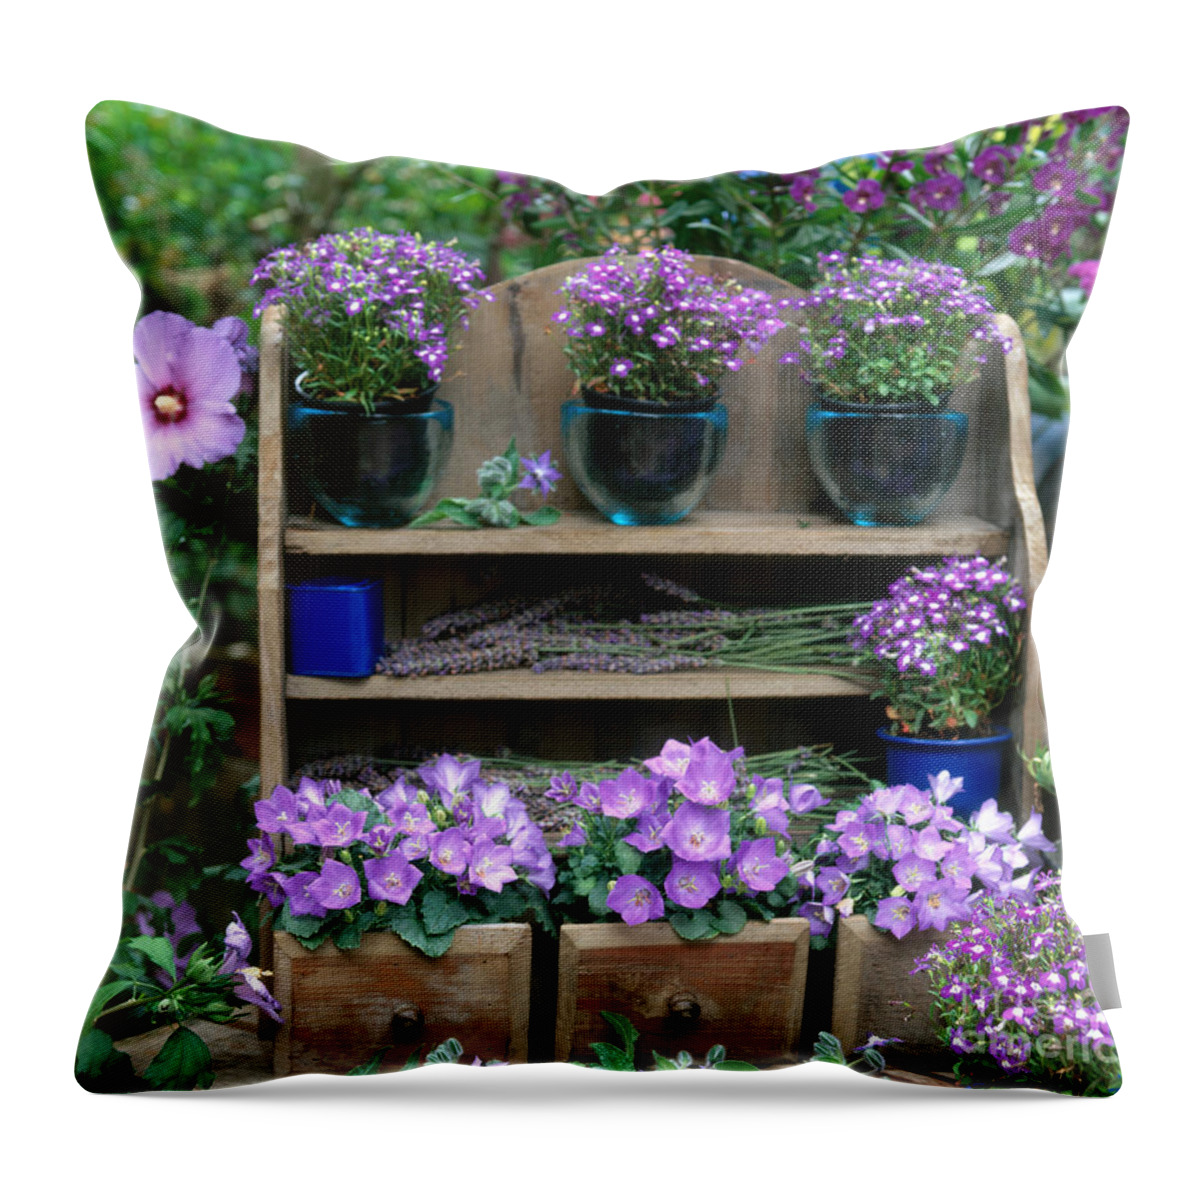 Plant Throw Pillow featuring the photograph Garden Still-life With Purple Flowers by Hans Reinhard